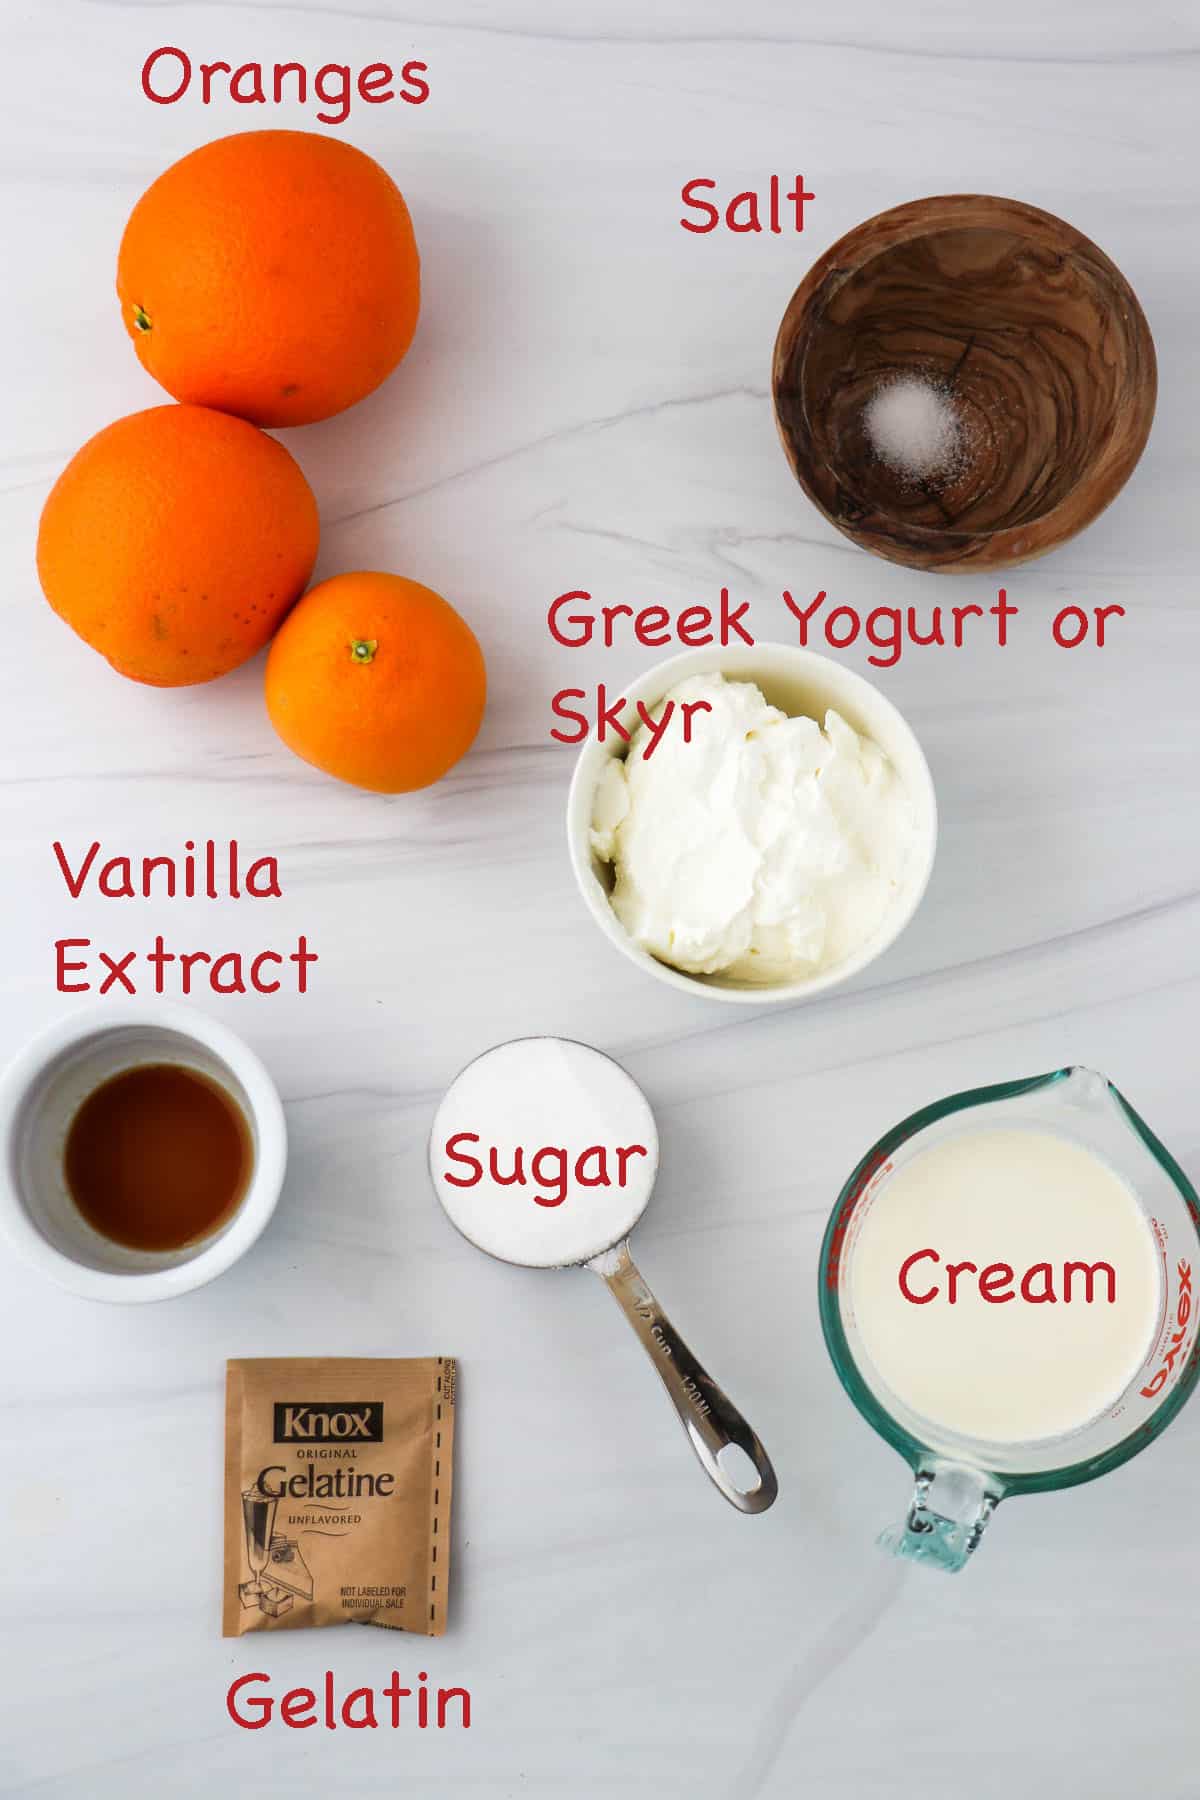 Labeled ingredients for orange mousse.